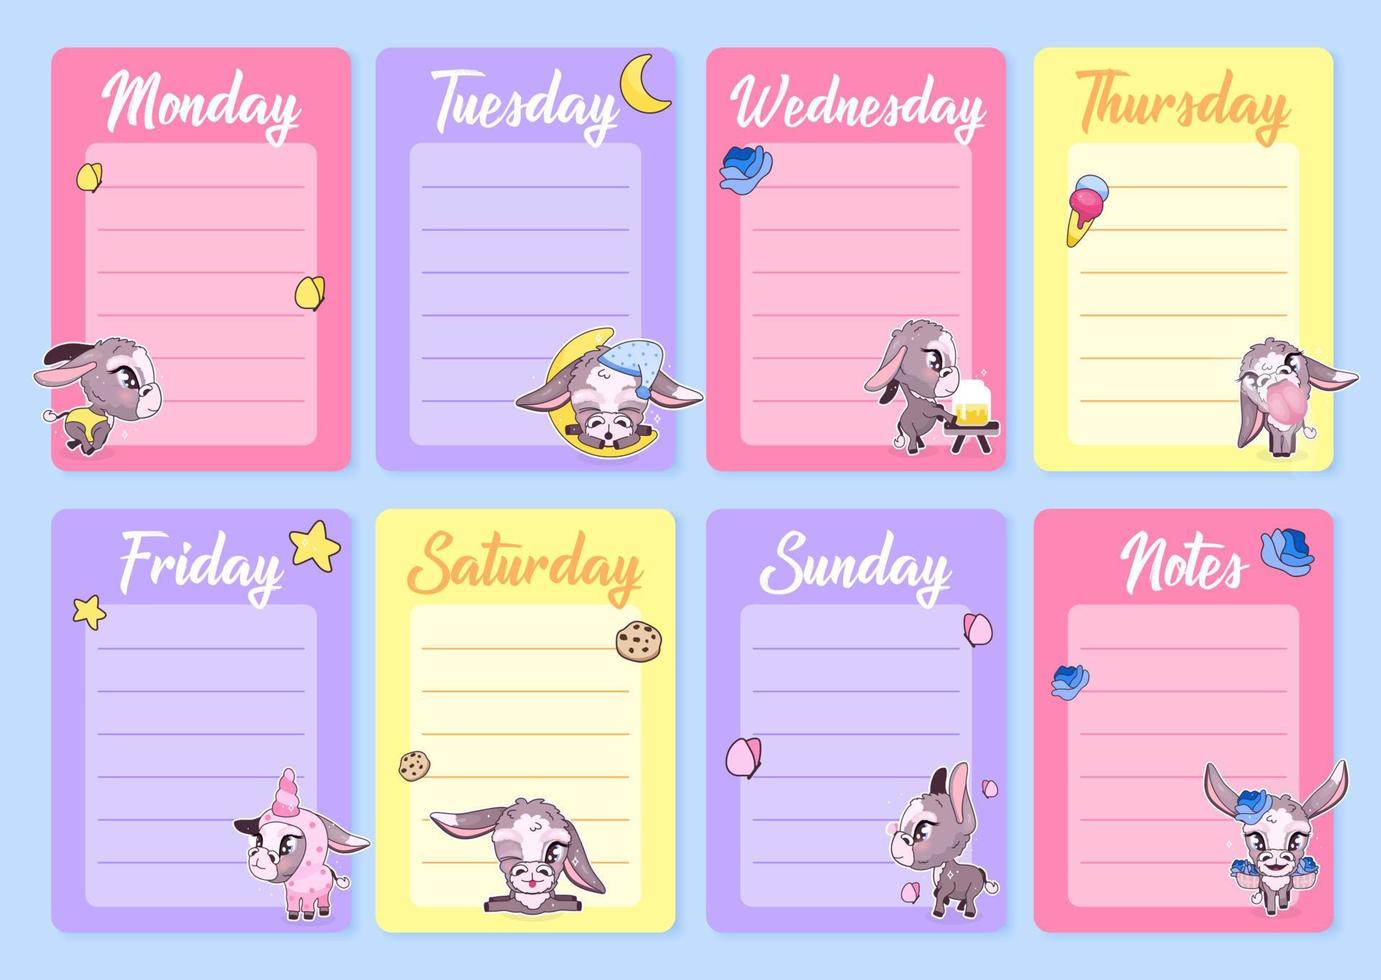 Cute donkeys weekly planner vector template with kawaii cartoon character. Notepad, diary pages design layouts with copyspace for daily notes and lists. Girlish personal organizer vector mockup